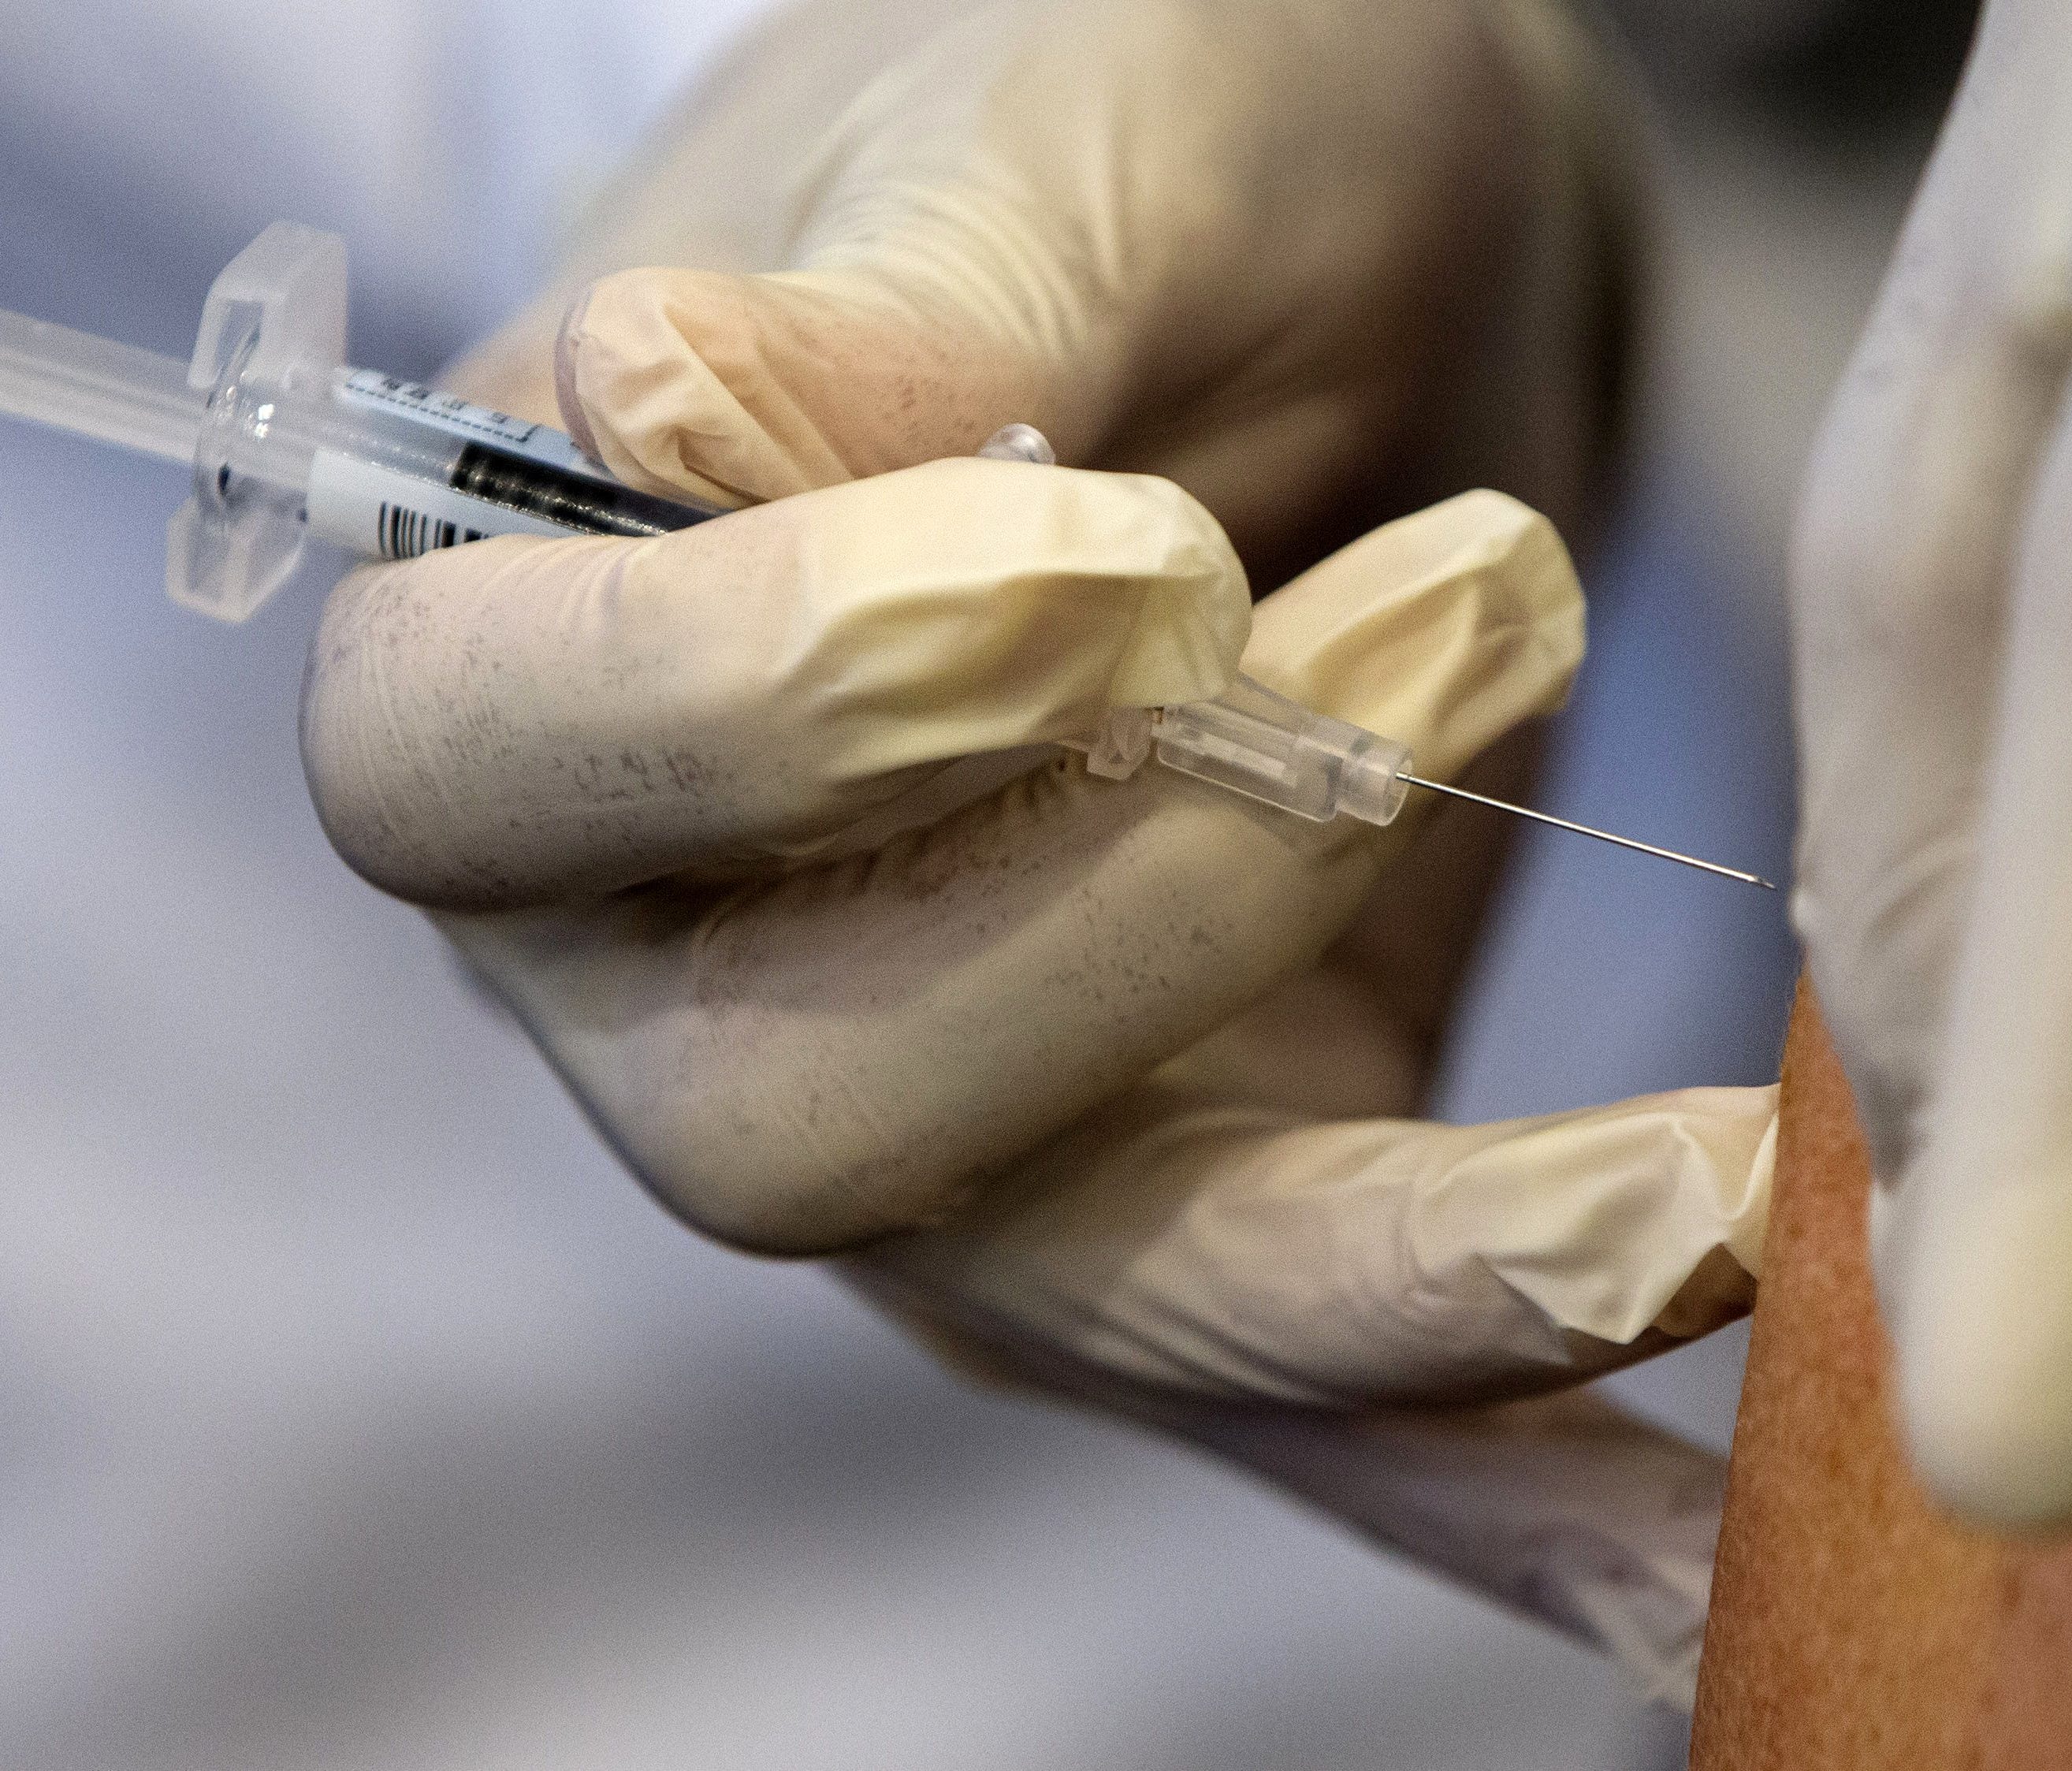 A nurse administers a flu vaccine shot in Washington. Medical expenses are a burden whenever they hit, but a recent study found they're most common around the first few months of the year.